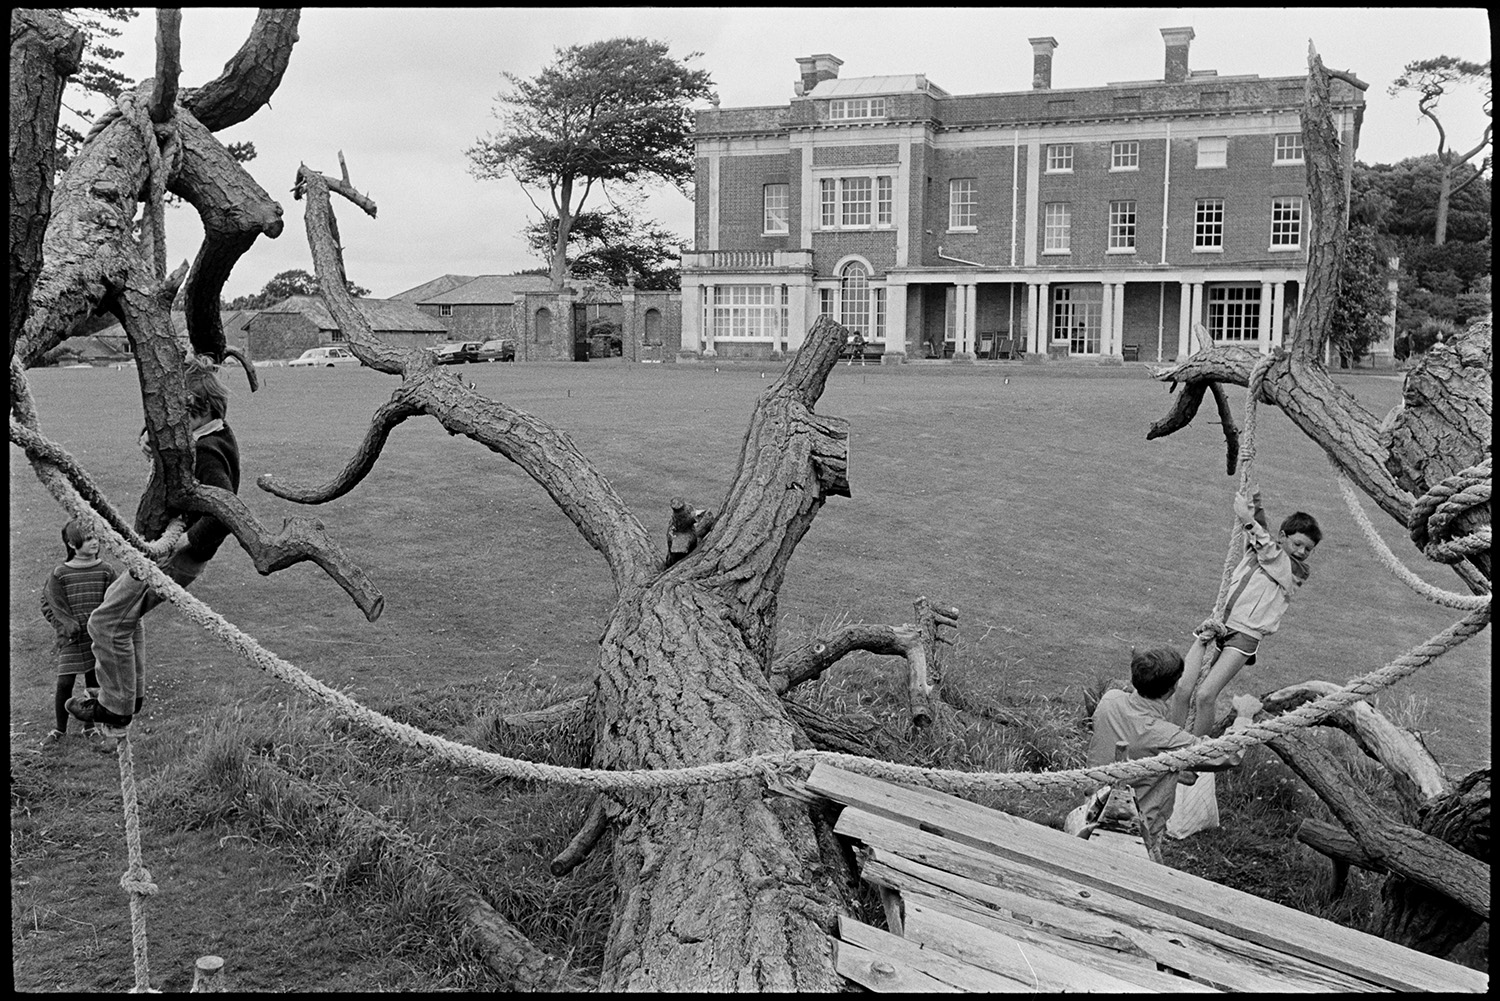 Park of stately home, house and climbing tree, tree house with tunnel through centre. 
[The house, out buildings and parkland at Tapely Park, Instow. Children are playing on ropes attached to the branches of a fallen tree in the foreground.]